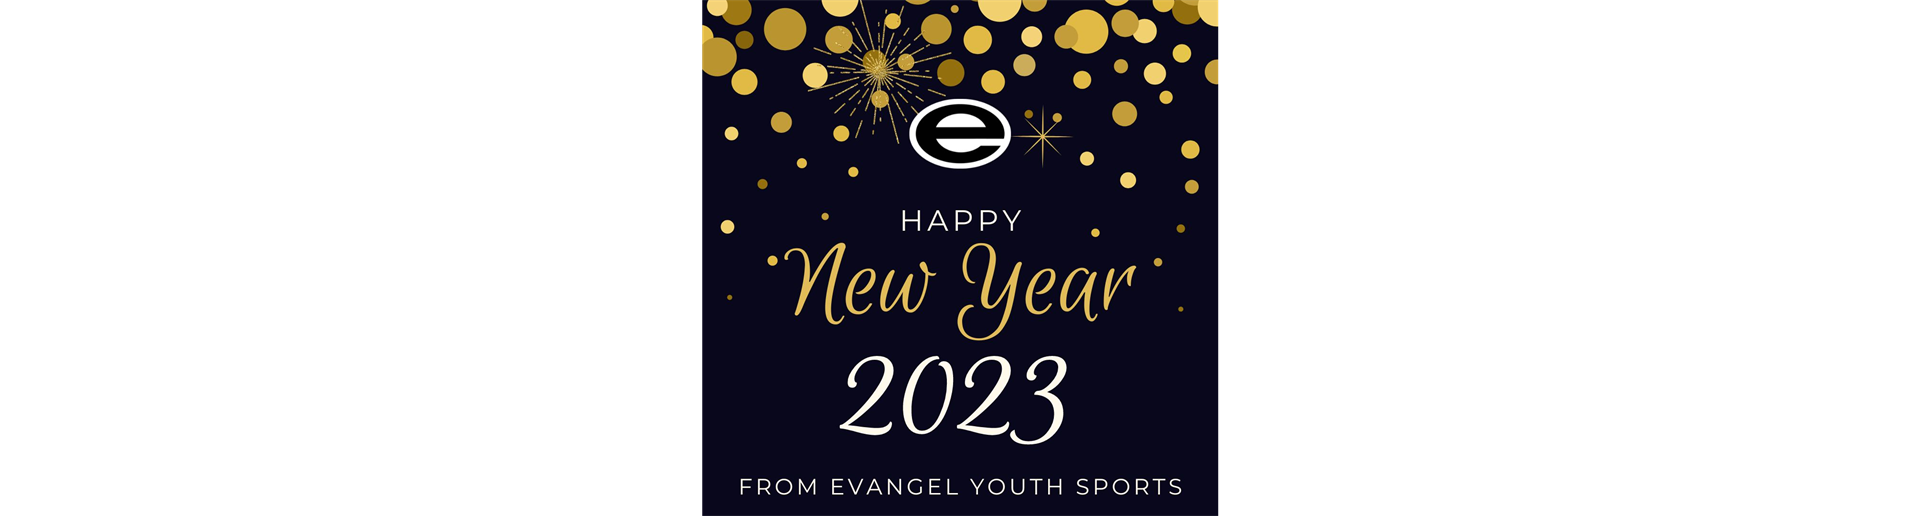 Happy New Year from Evangel Youth Sports